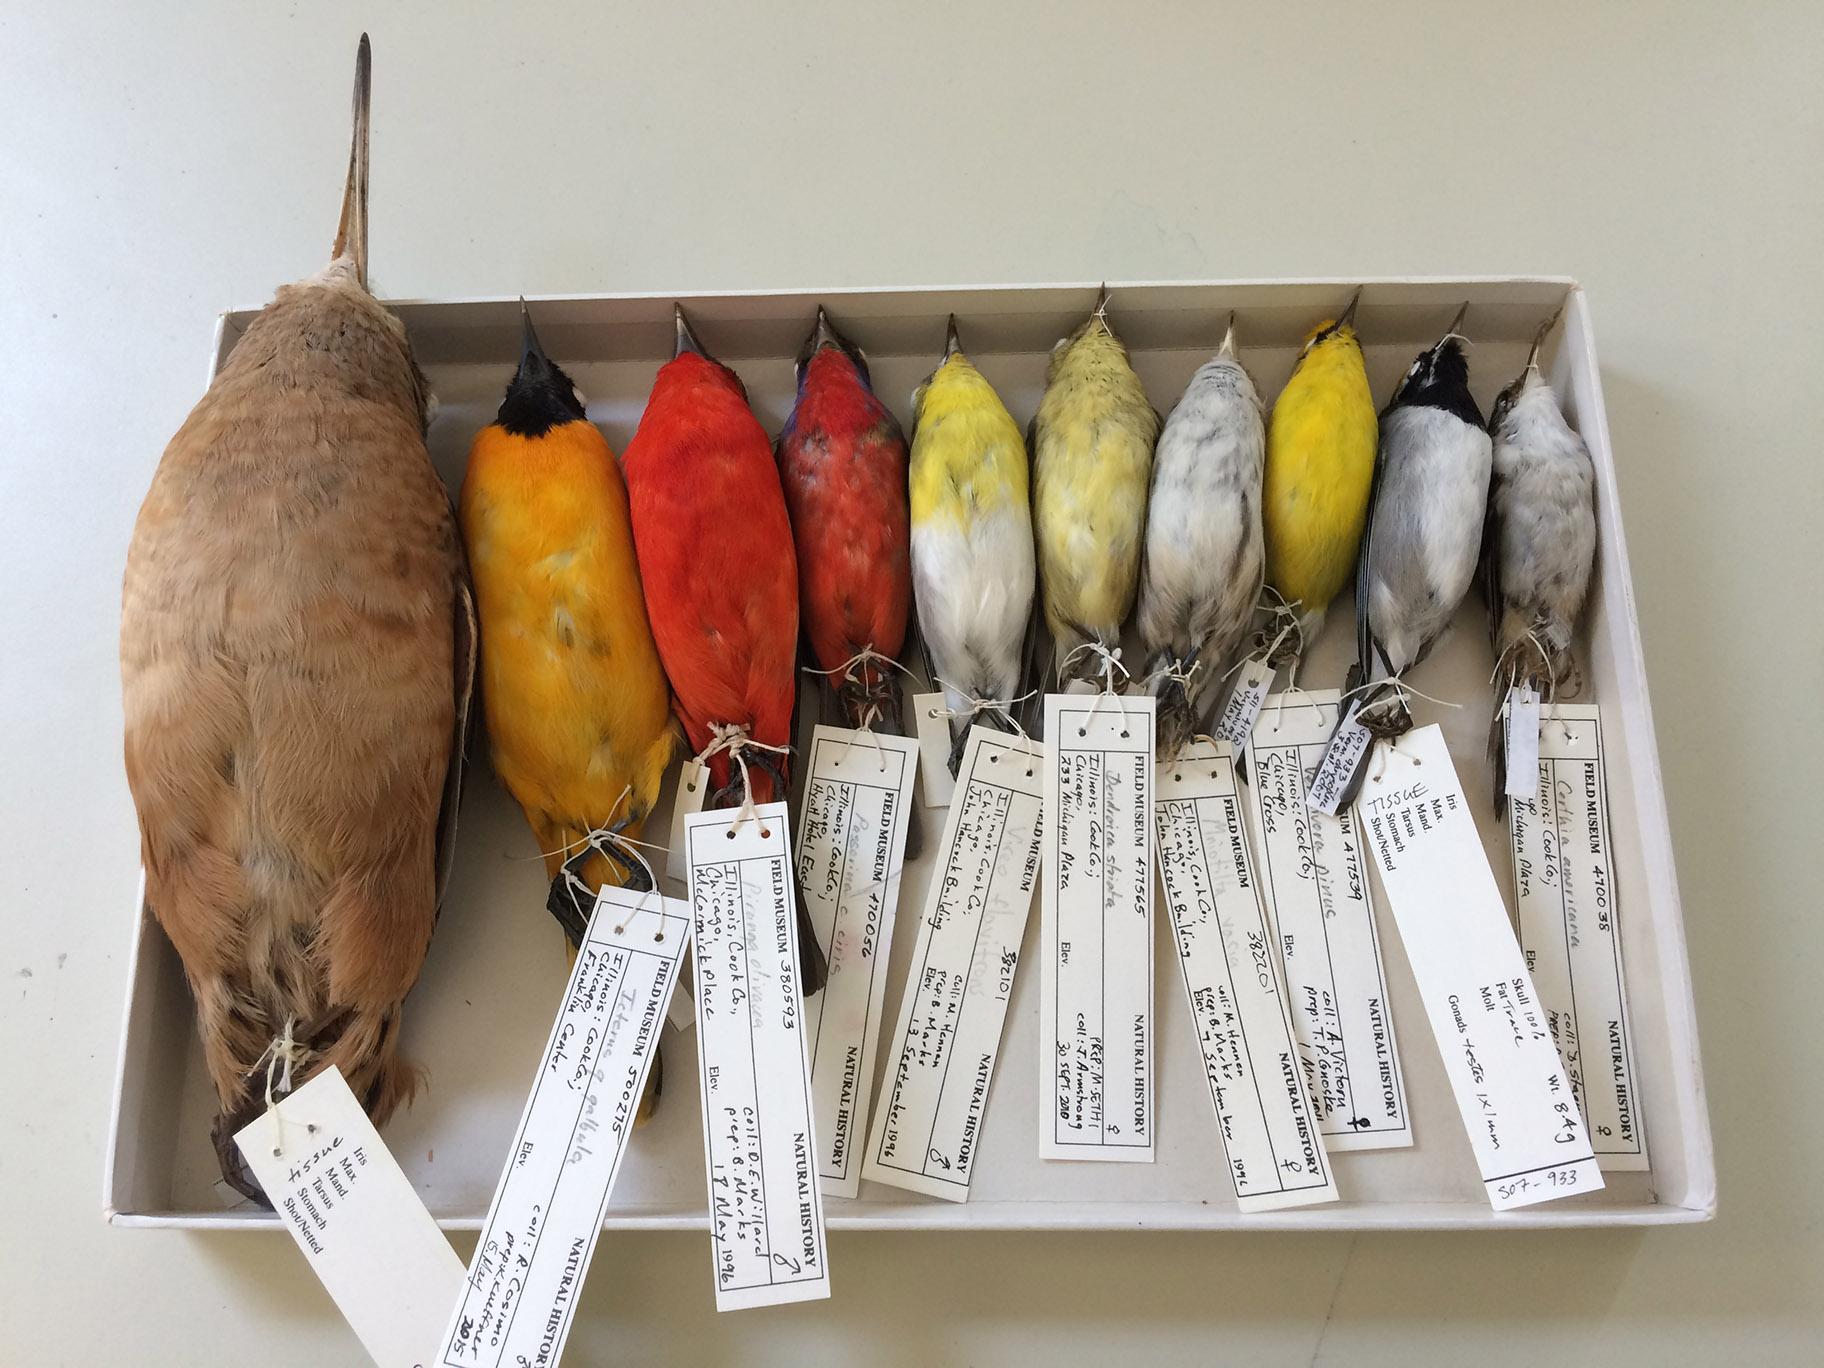 Dead birds collected by the Chicago Bird Collision Monitors were given to the Field Museum's Bird Division. (Josh Engel / The Field Museum)